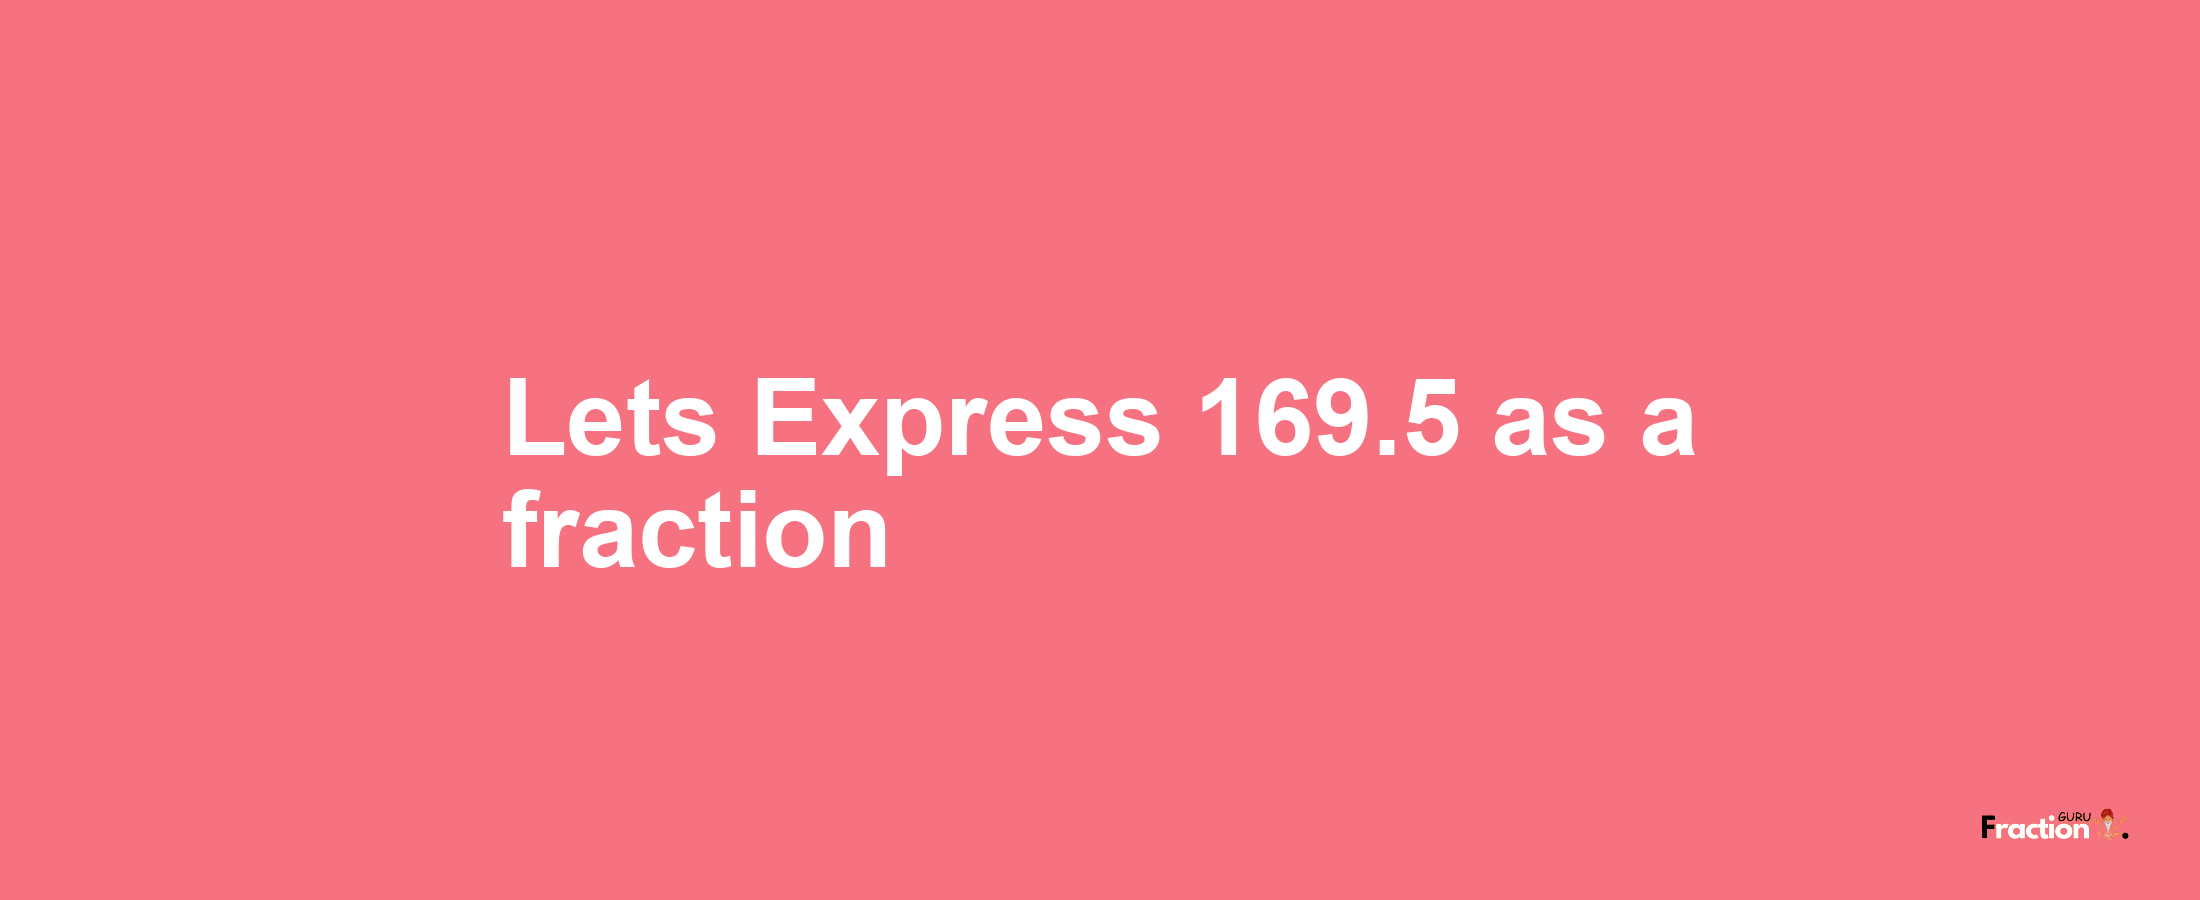 Lets Express 169.5 as afraction